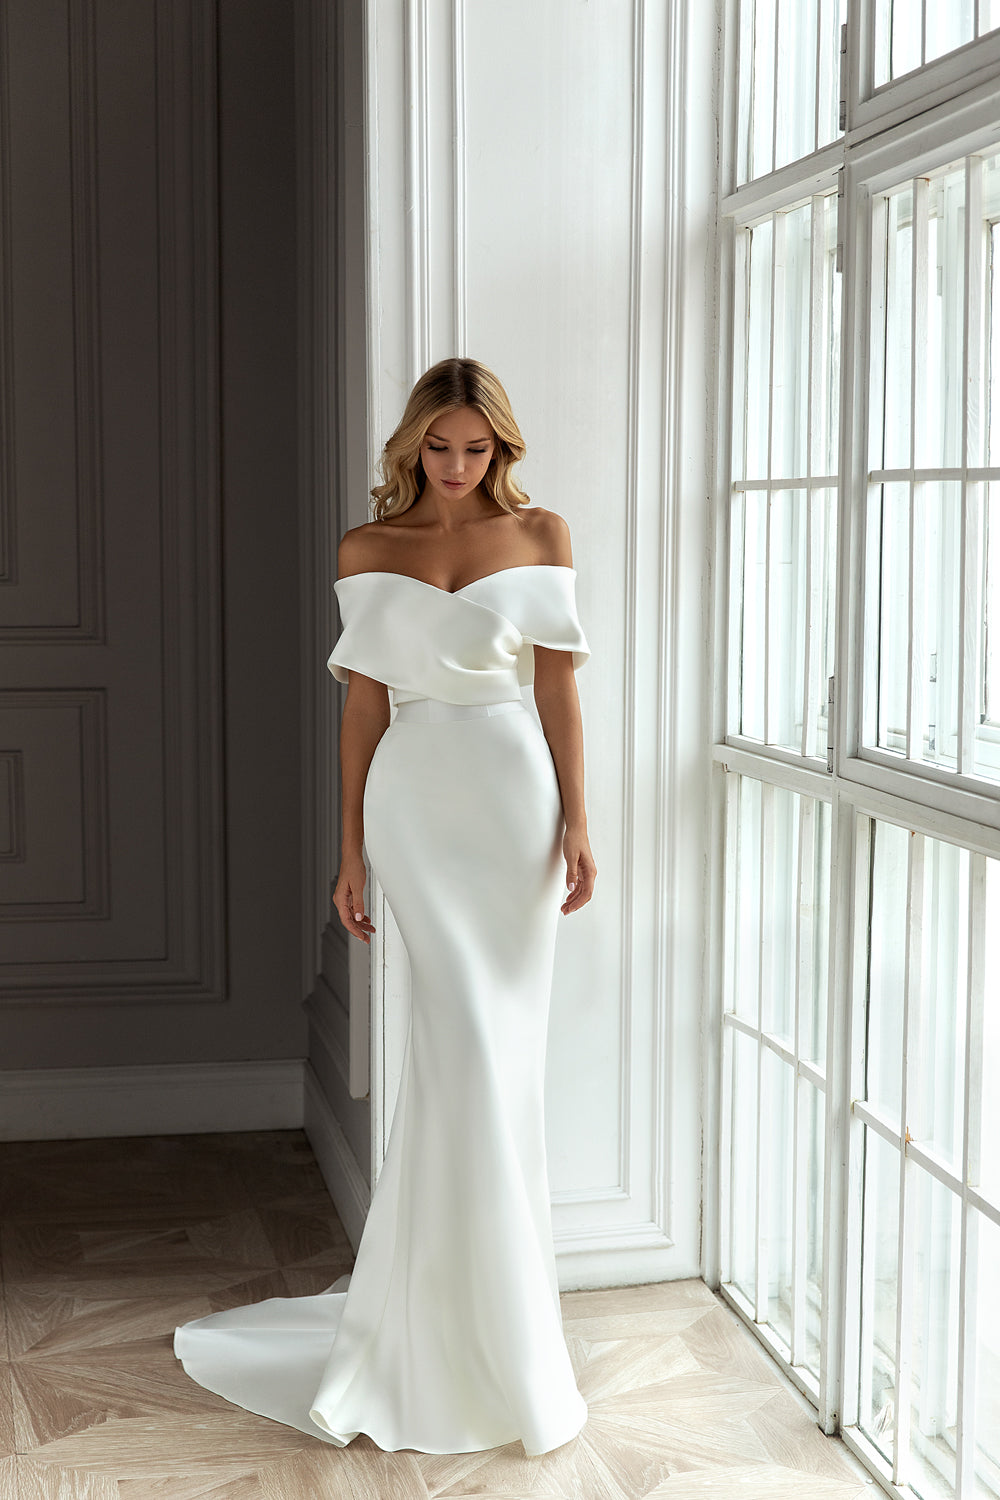 Plus Size Wedding Dress also available with overskirt